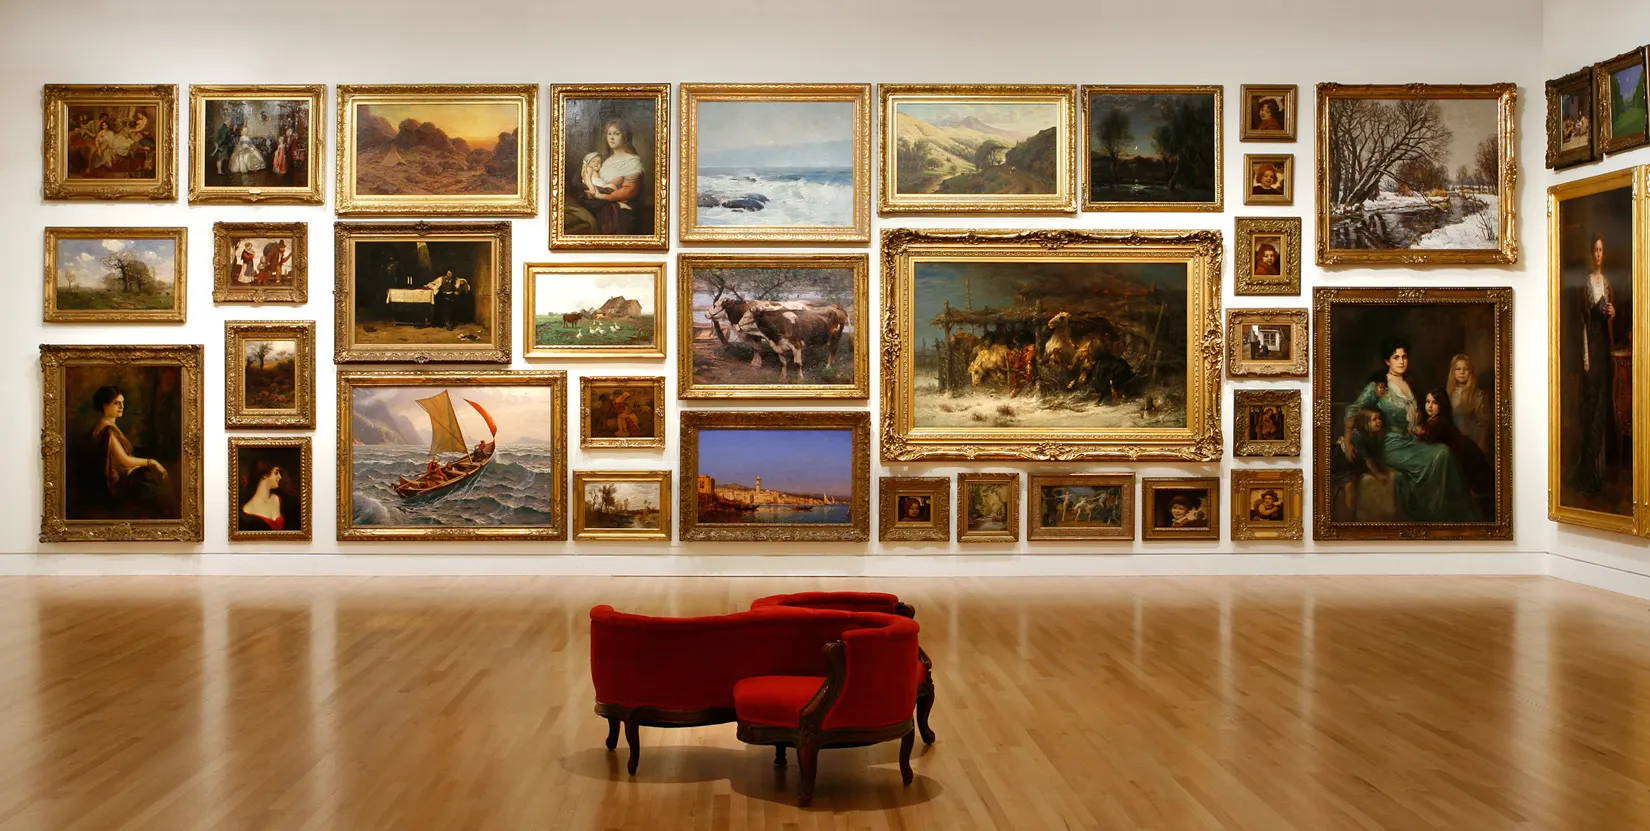 museum room with a collage of paintings along the walls., and  a red couch in the middle of the room